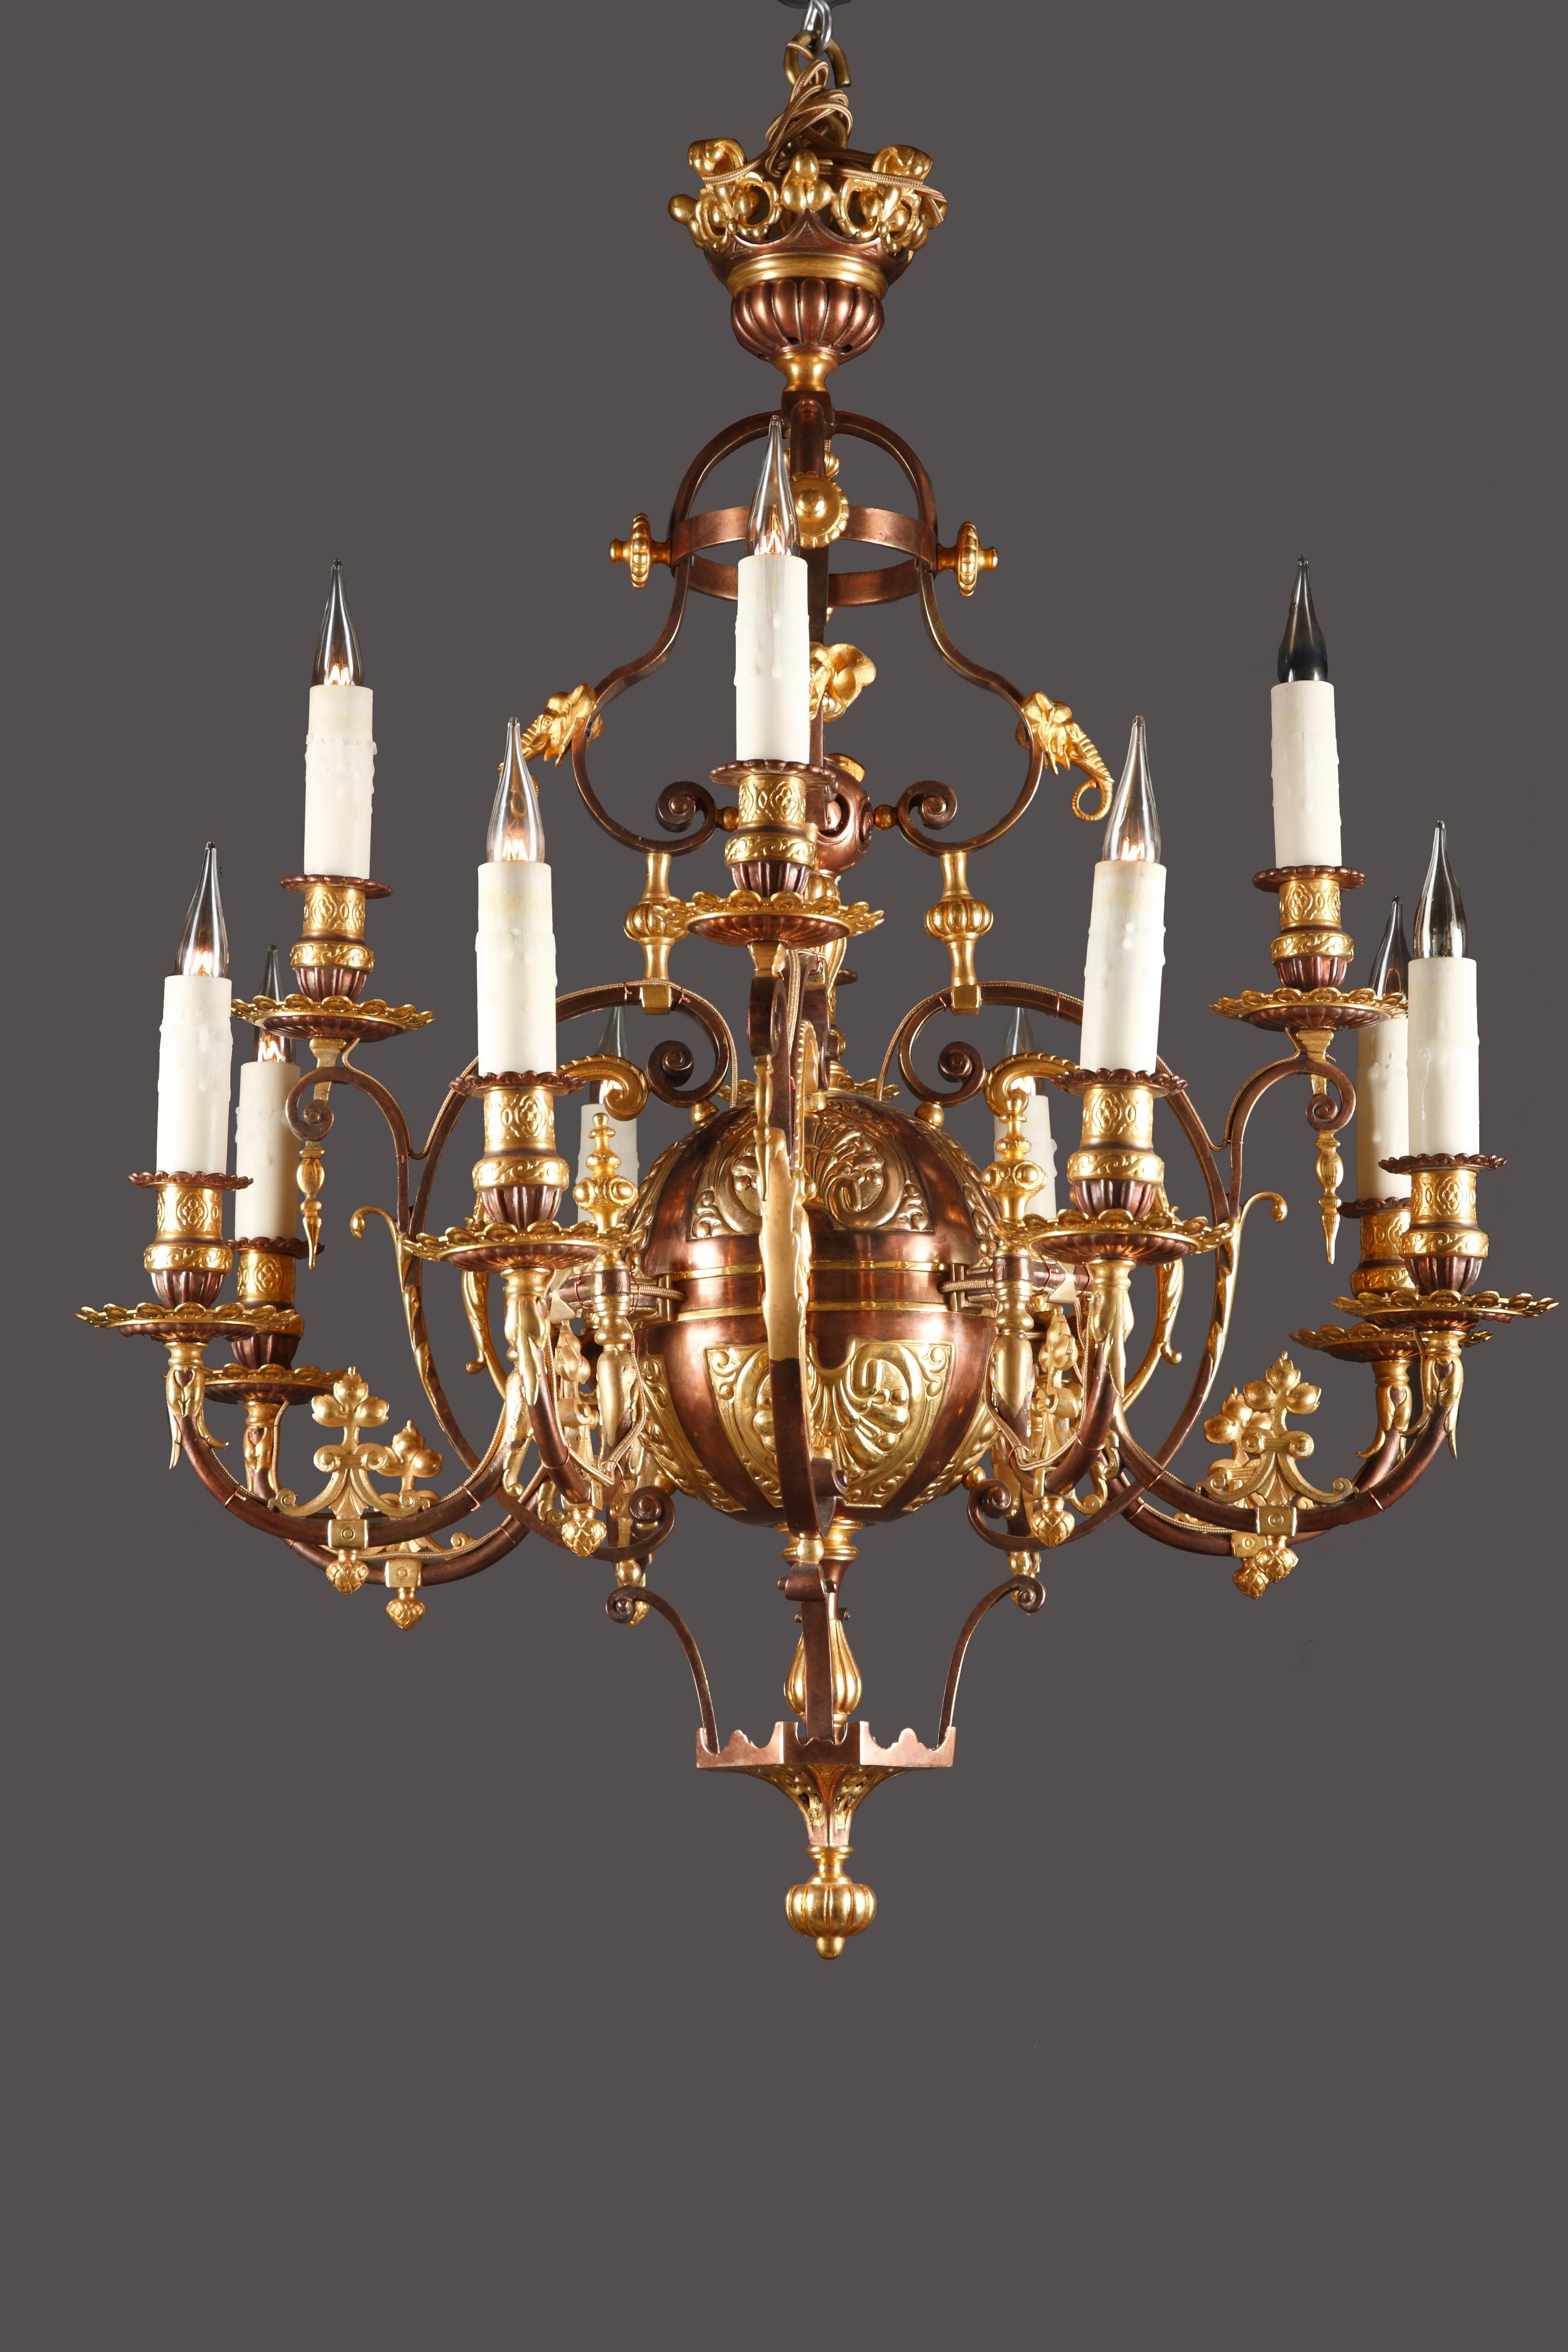 A very fine oriental style twelve light arms double patina bronze chandelier. With a beautiful bronze cast ornamented with fleur-de-lys, palmets and elephant heads cast in relief.